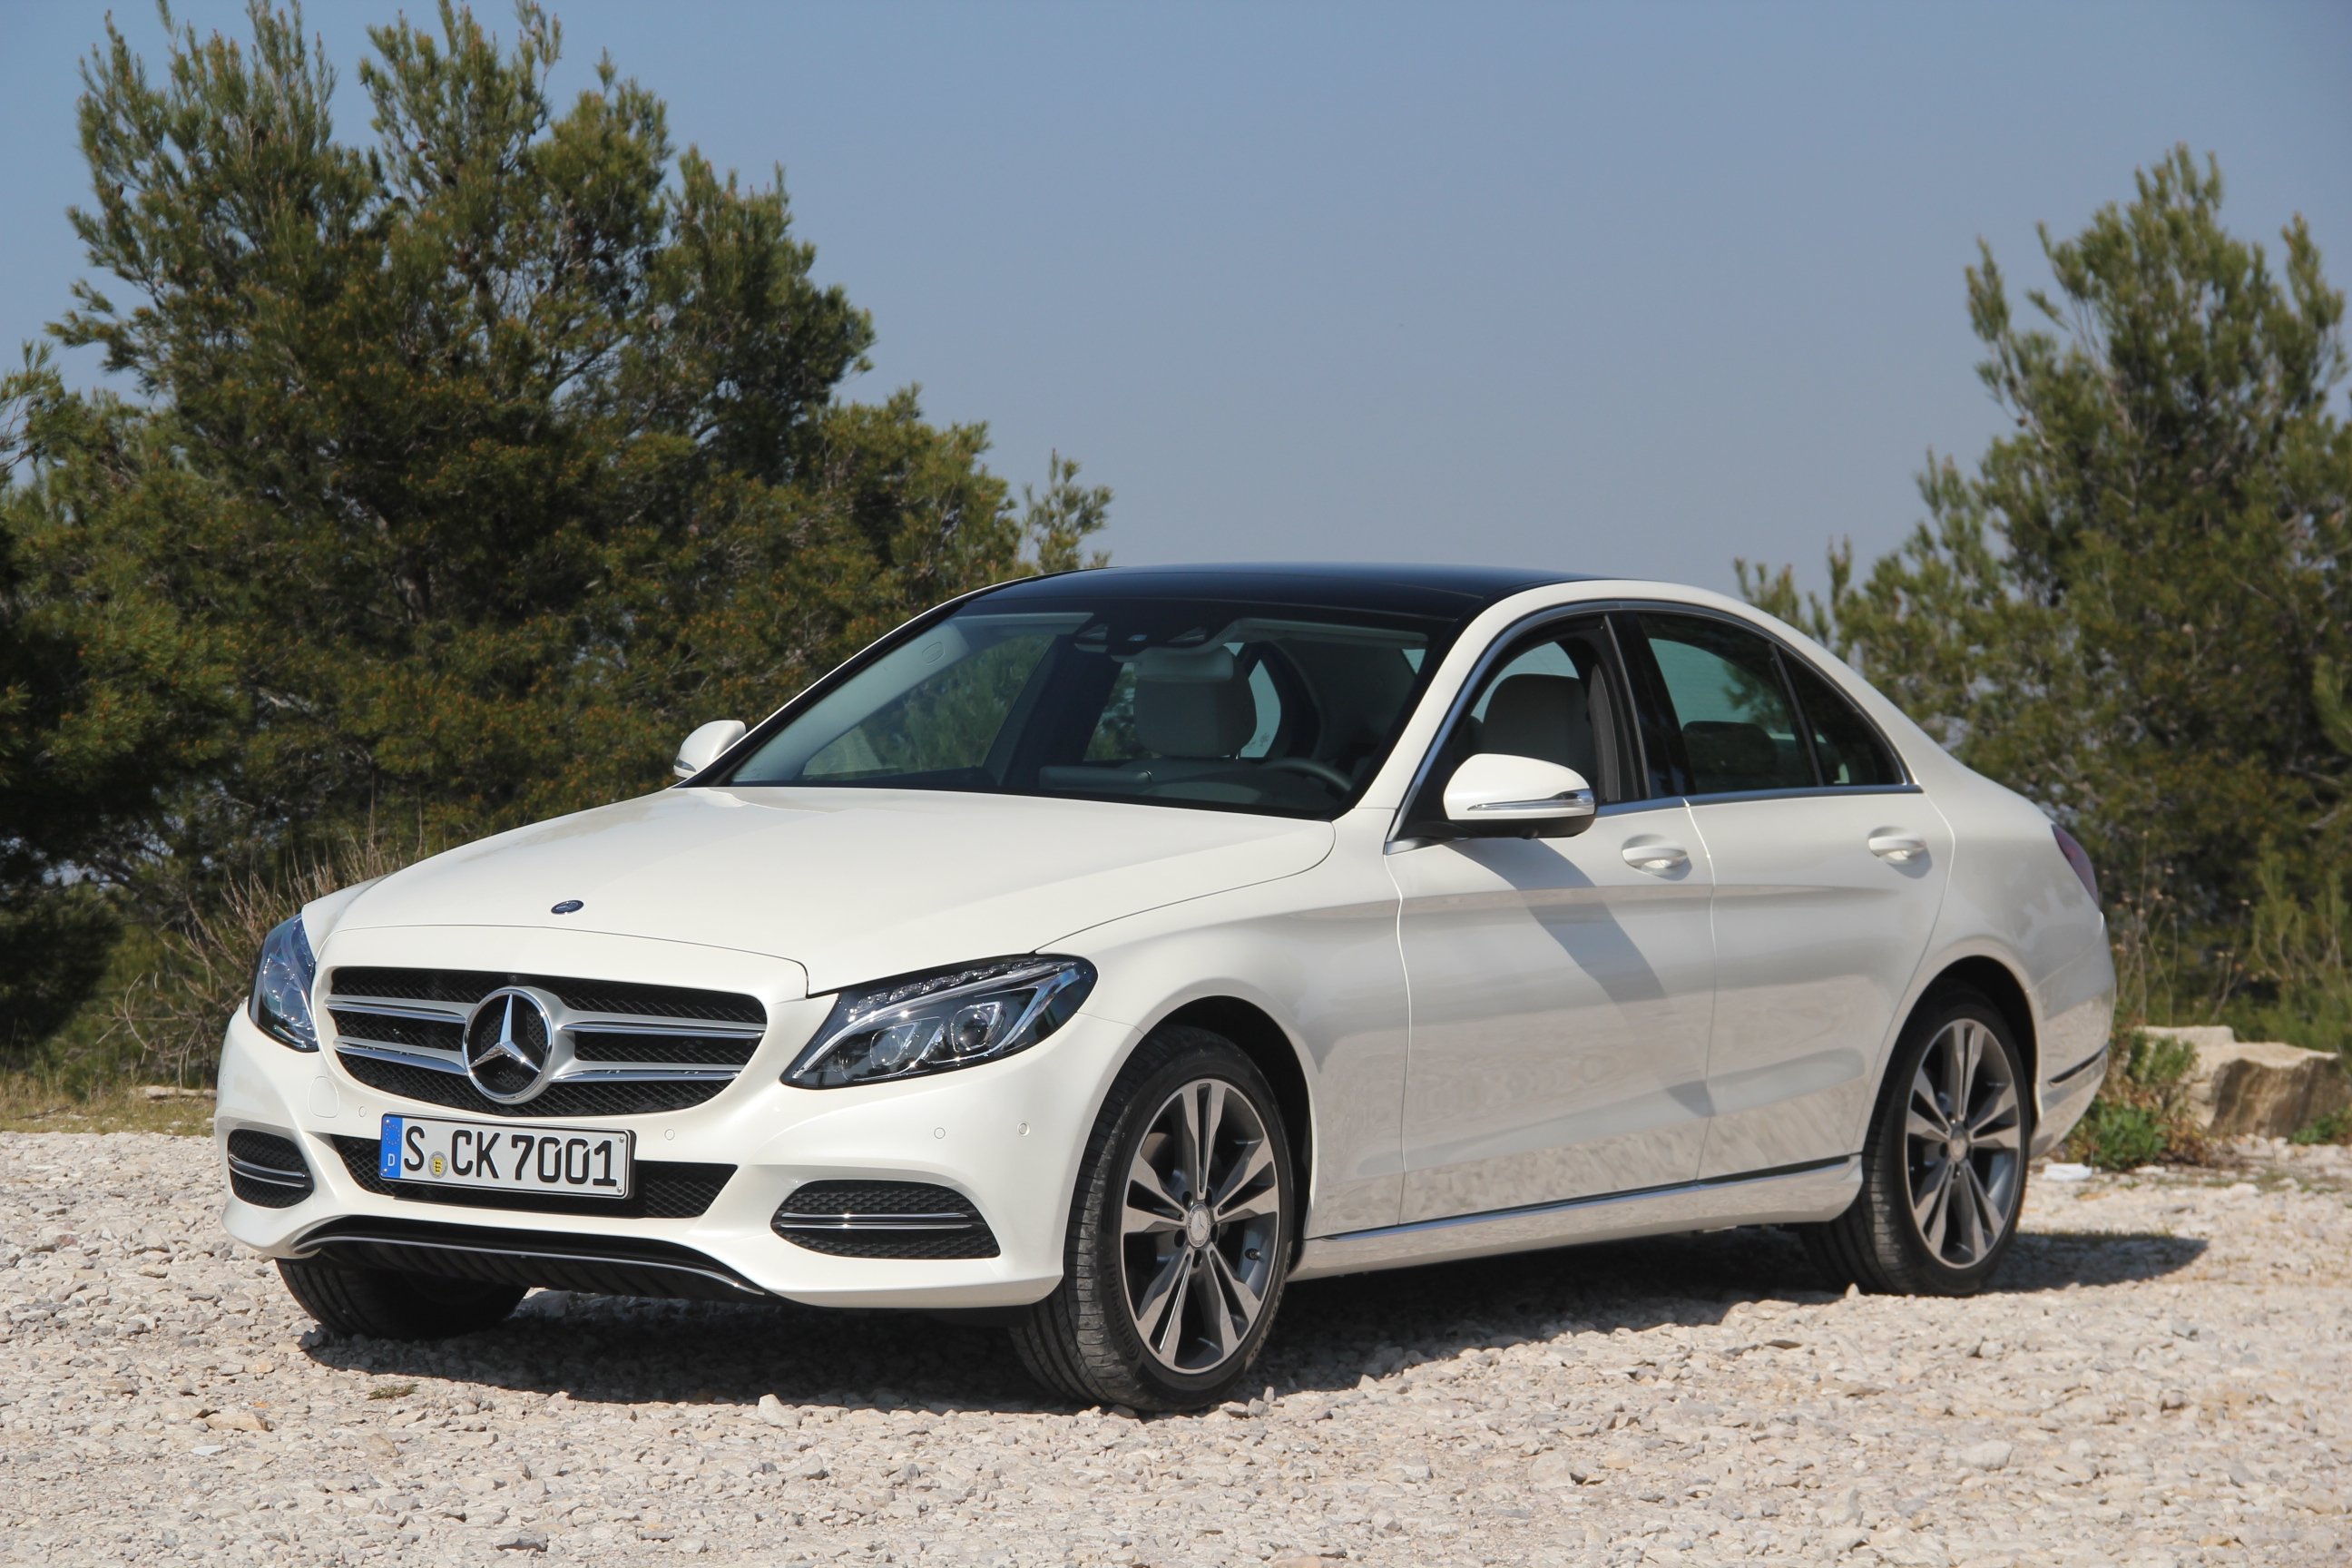 2014 mercedes classe c200 Wallpapers HD / Desktop and Mobile Backgrounds